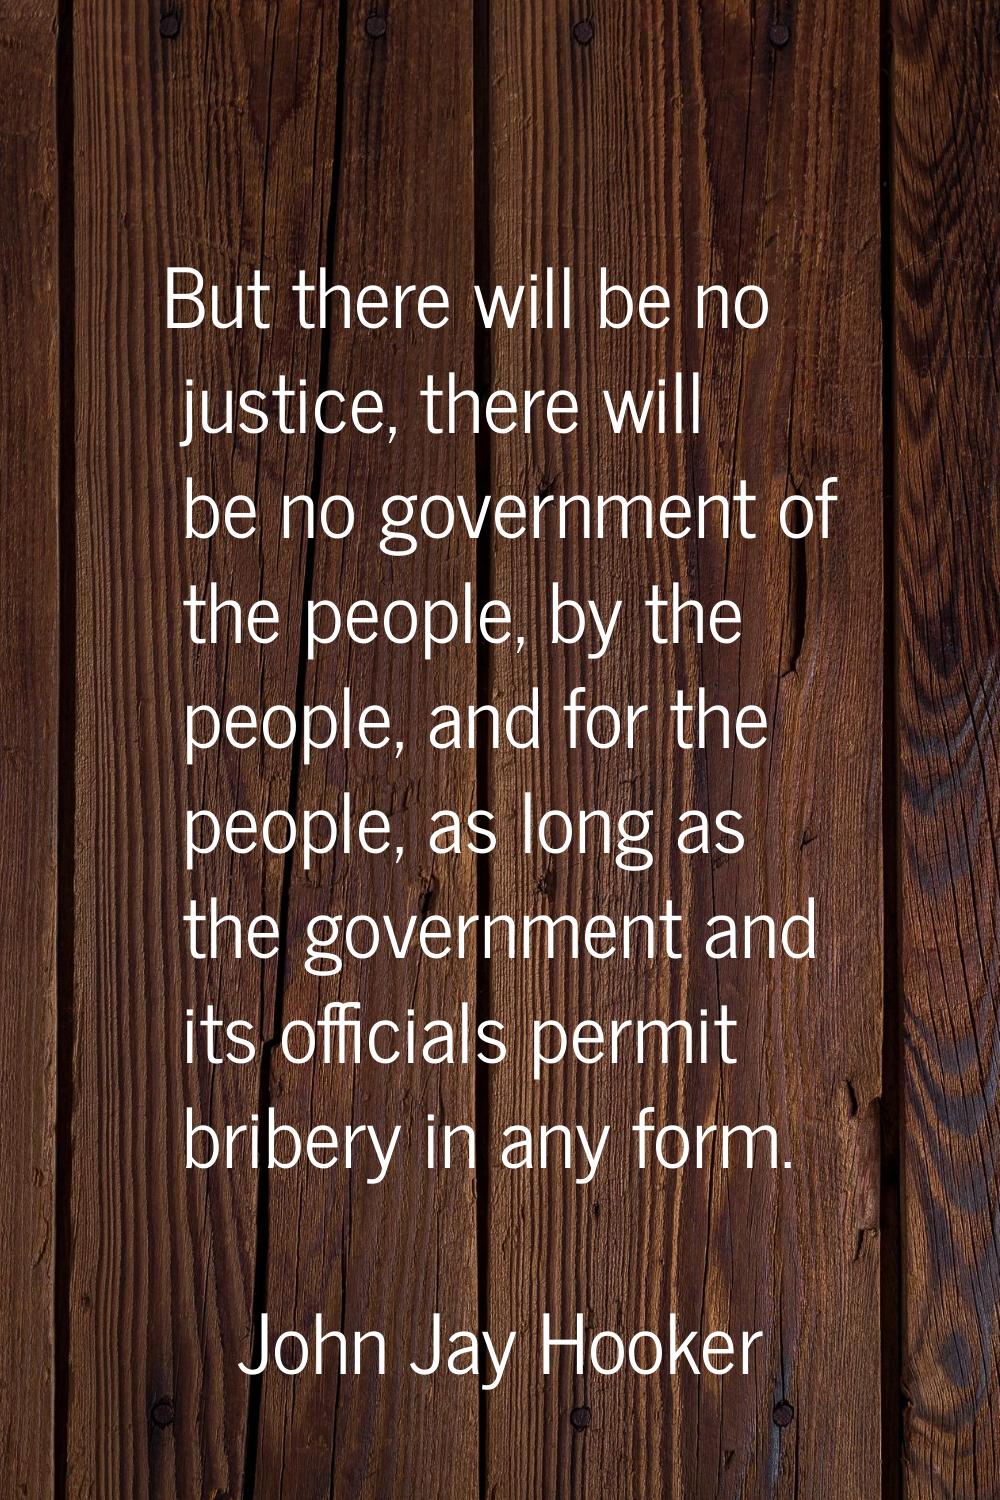 But there will be no justice, there will be no government of the people, by the people, and for the